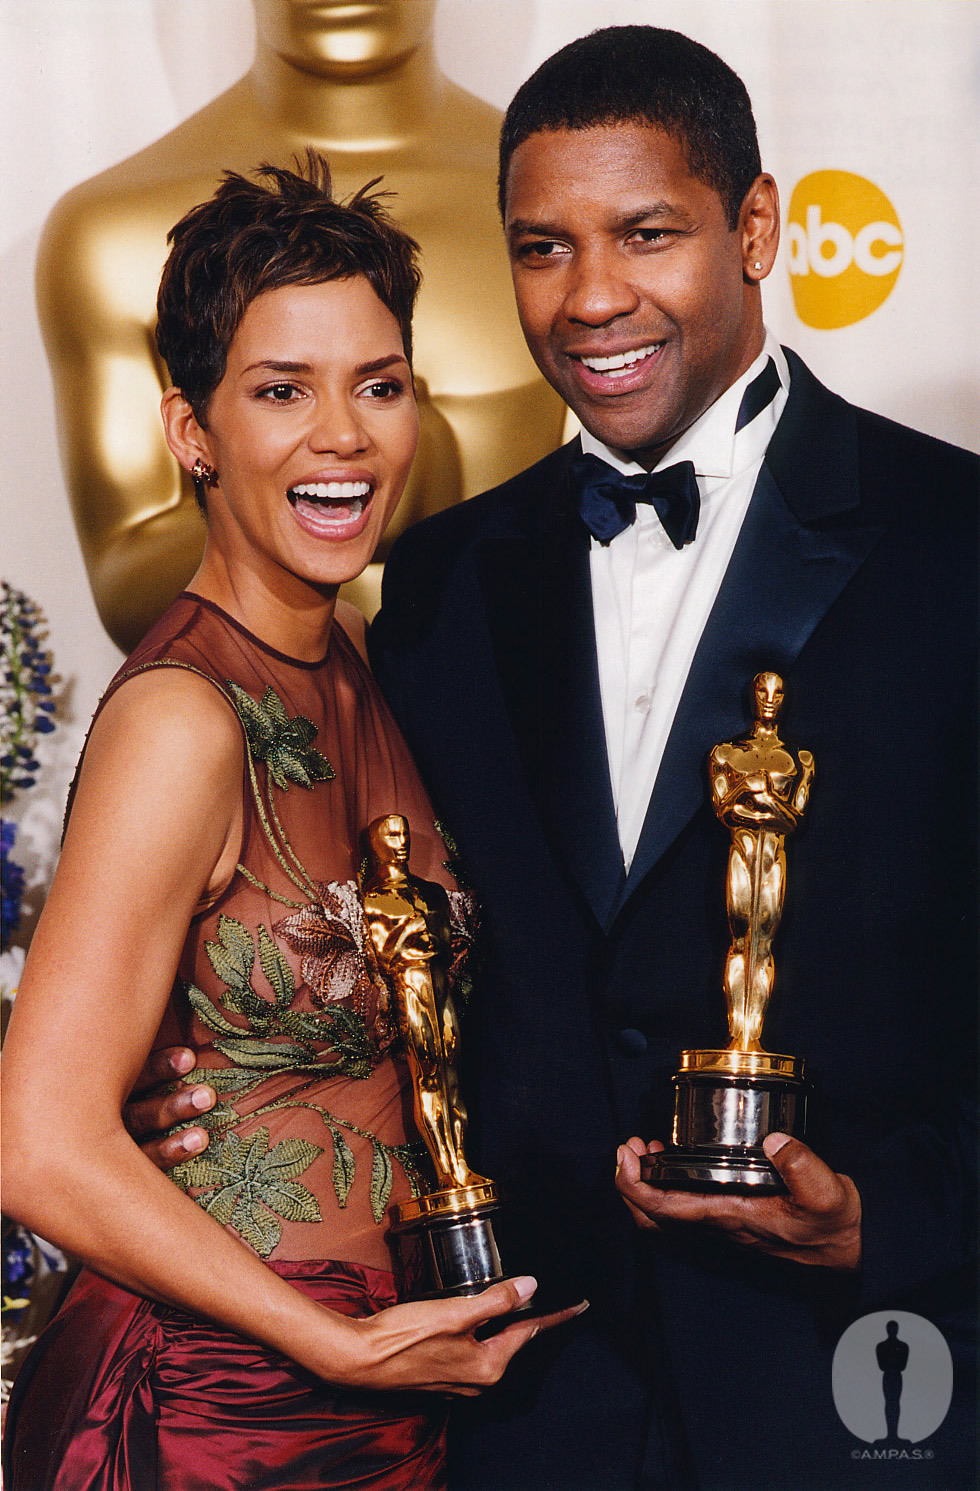 Denzel Washington and Halle Berry at event of The 74th Annual Academy Awards (2002)